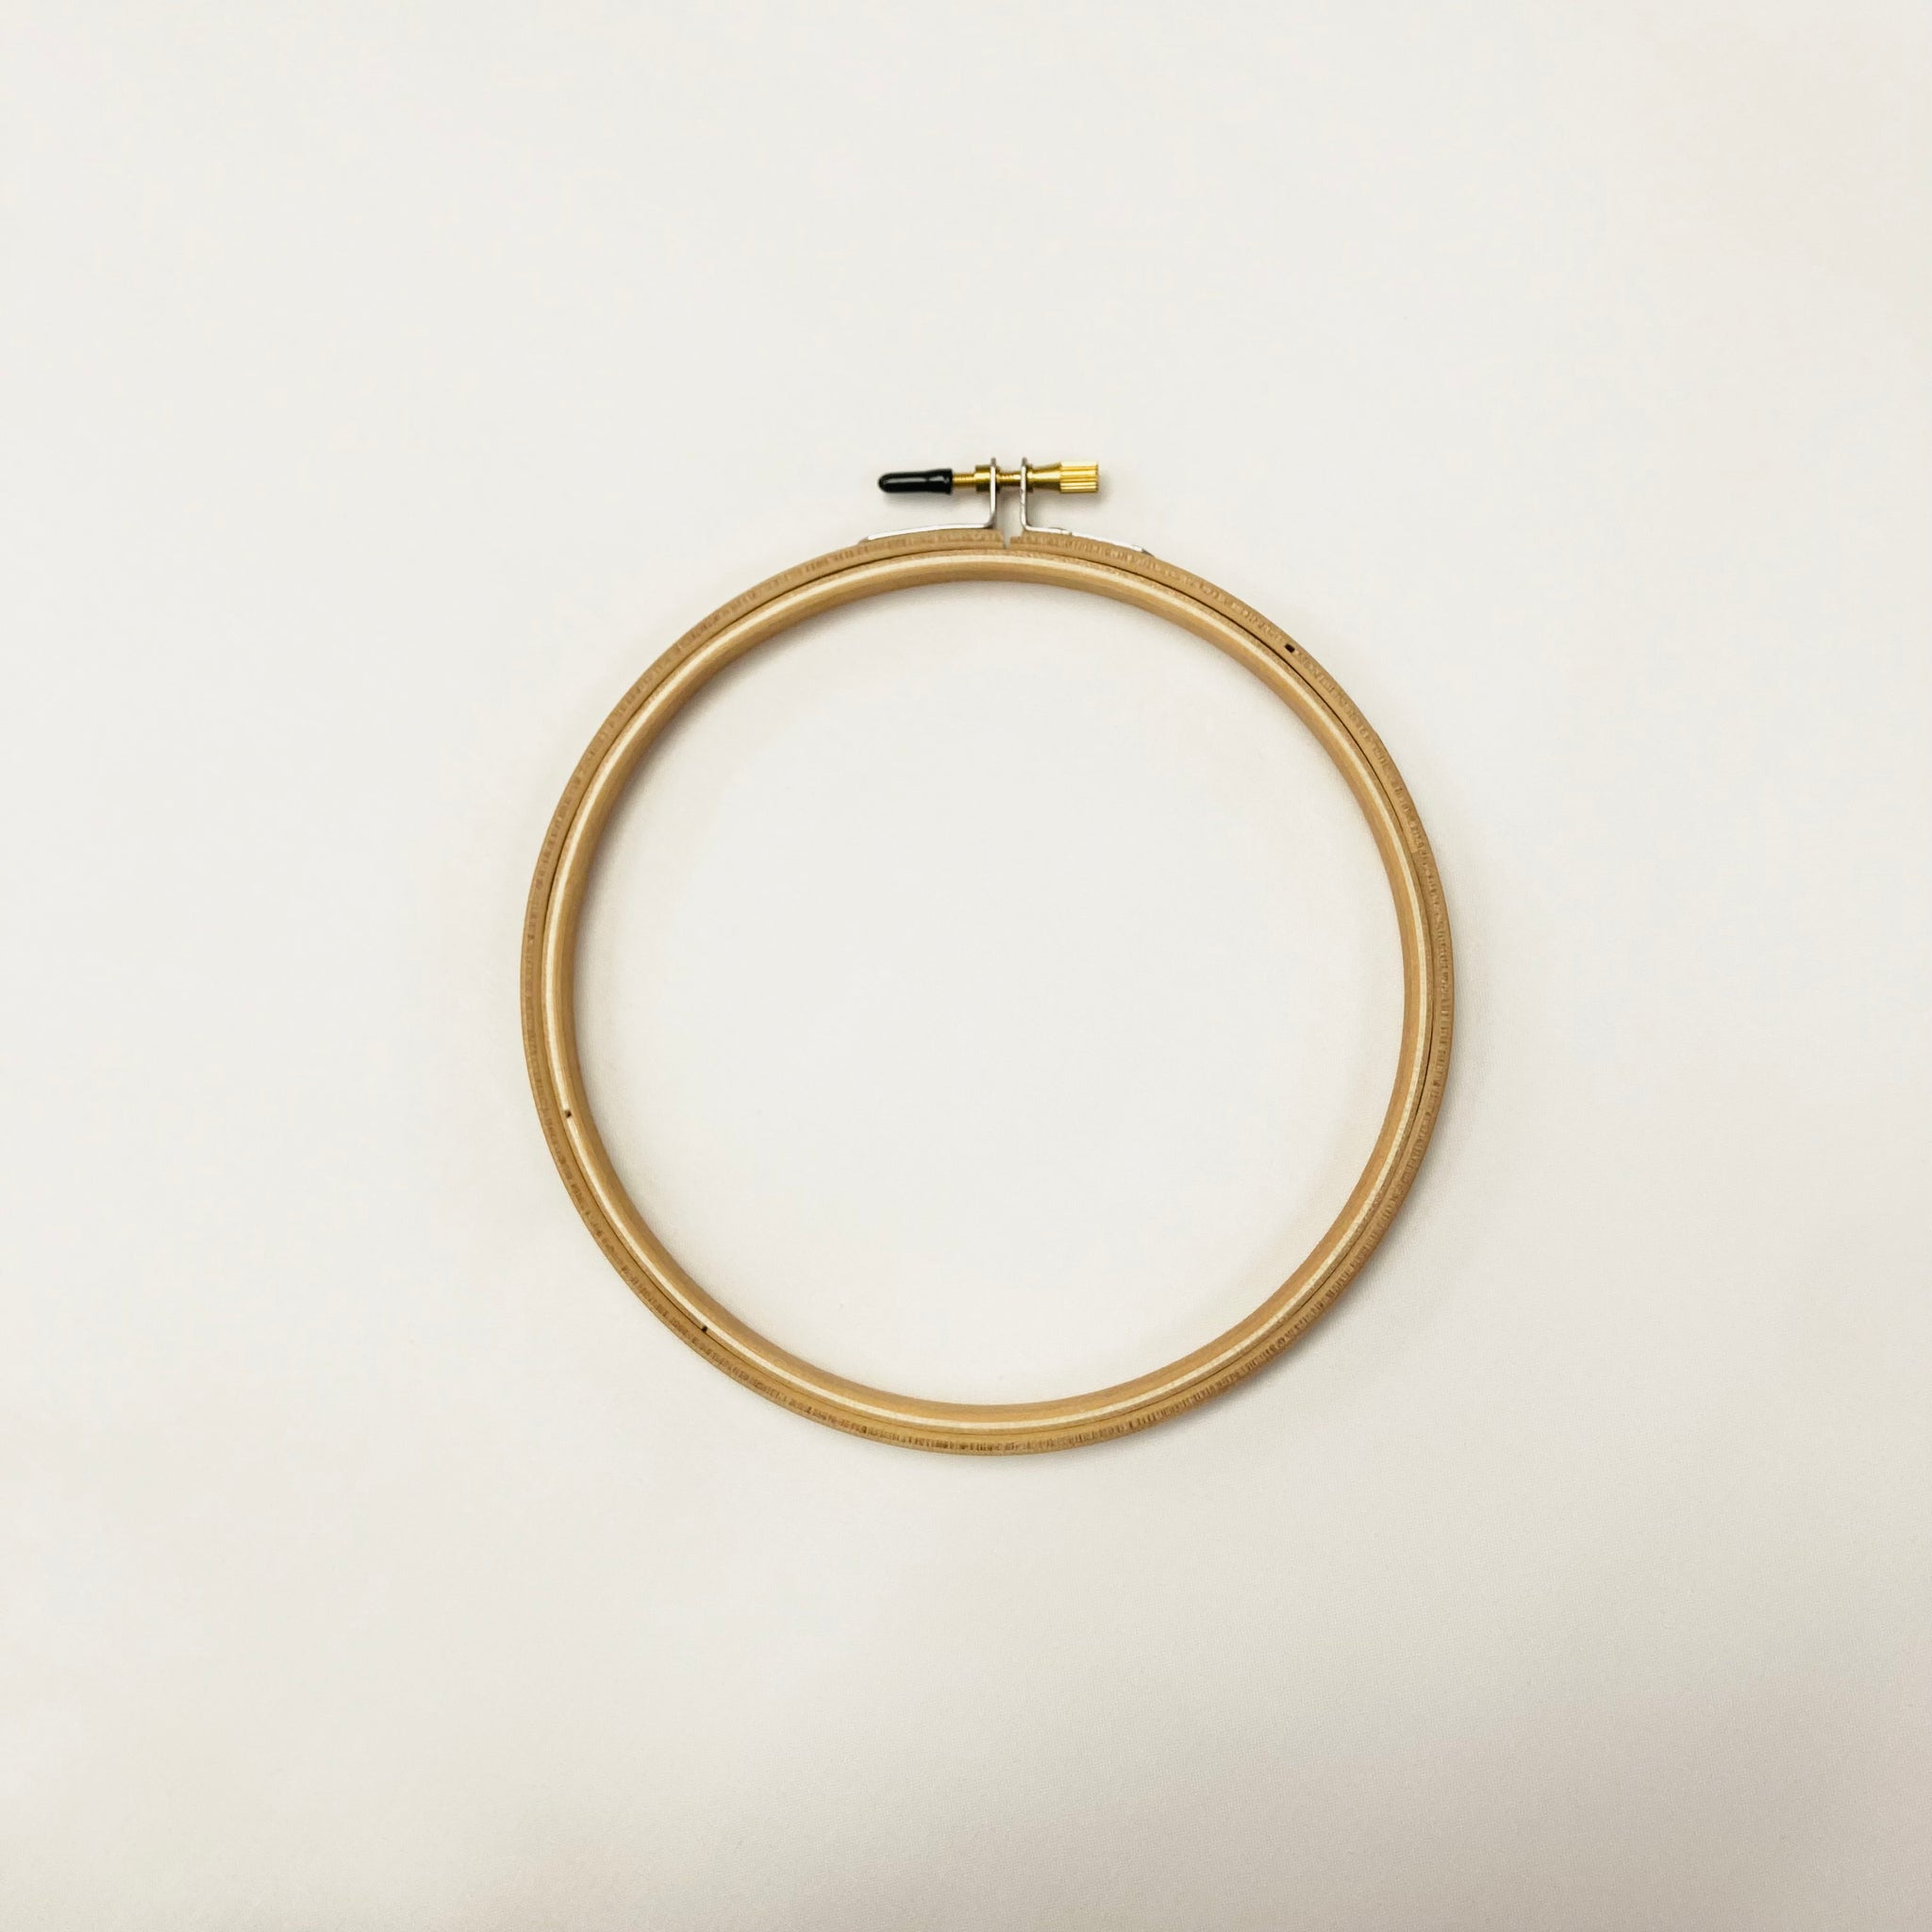 Embroidery Hoop - 6" (15cm) Round